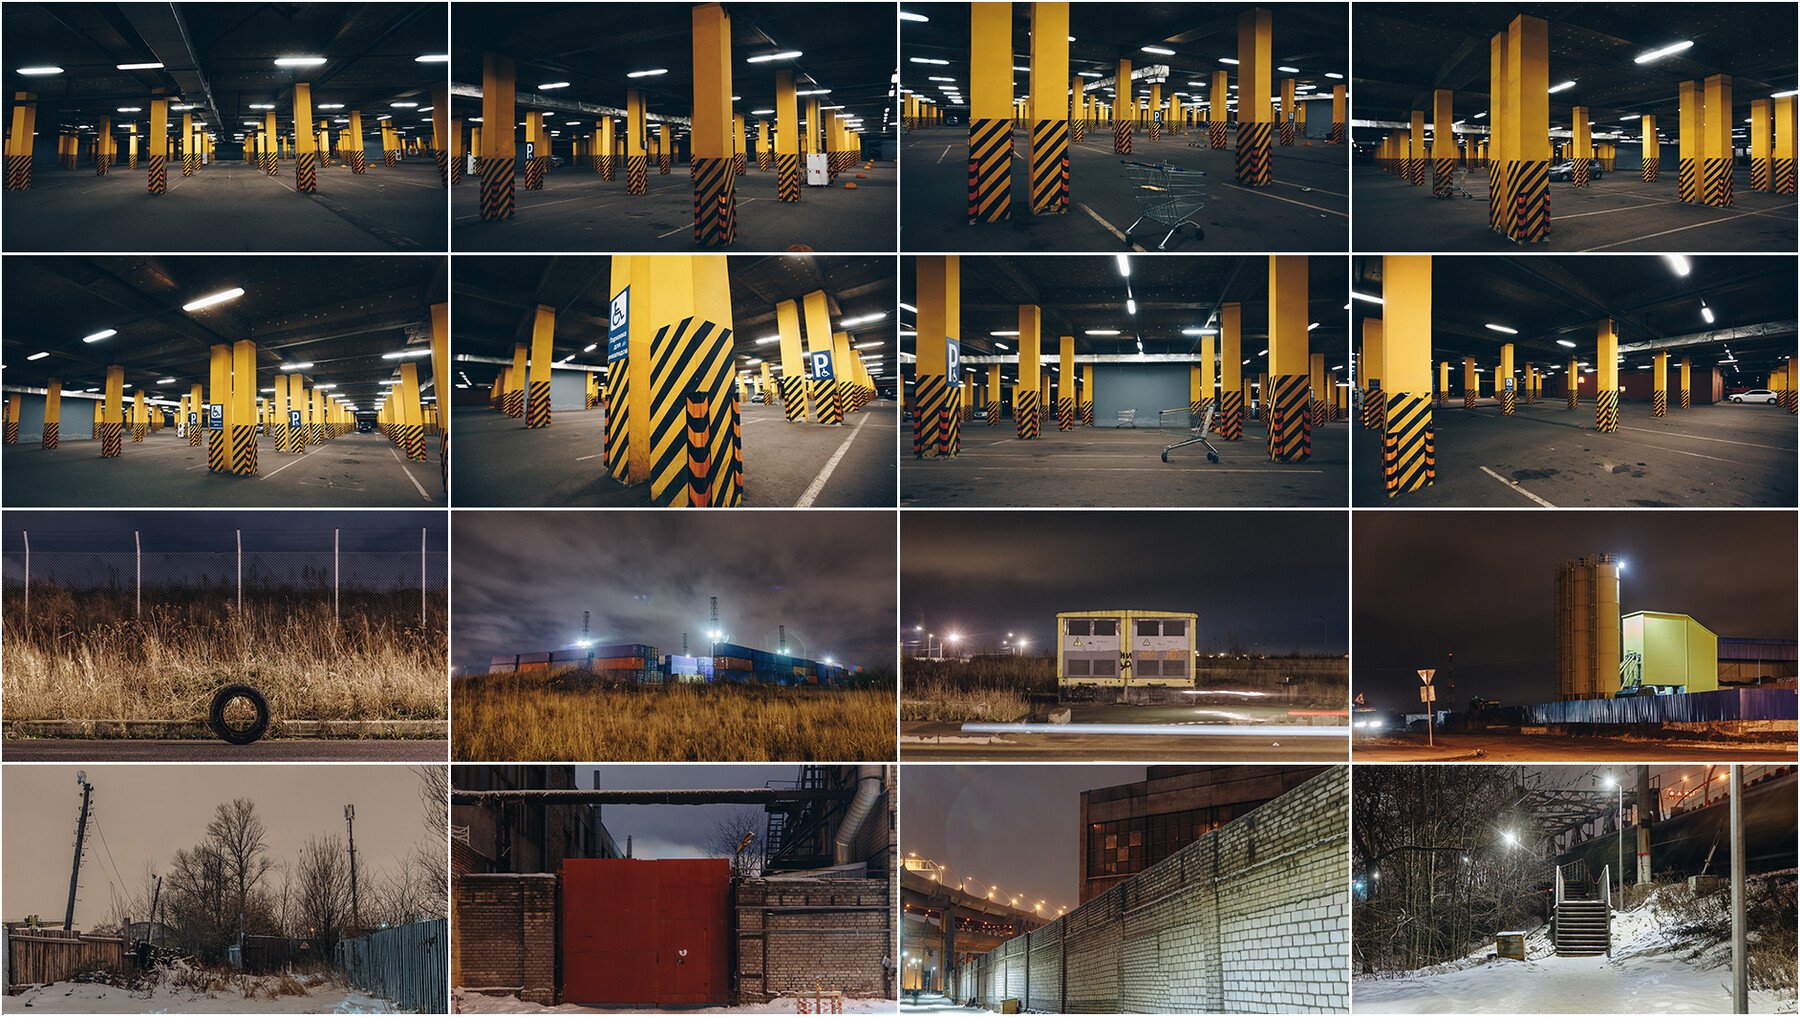 450+ Night Industrial Zone Reference Pictures